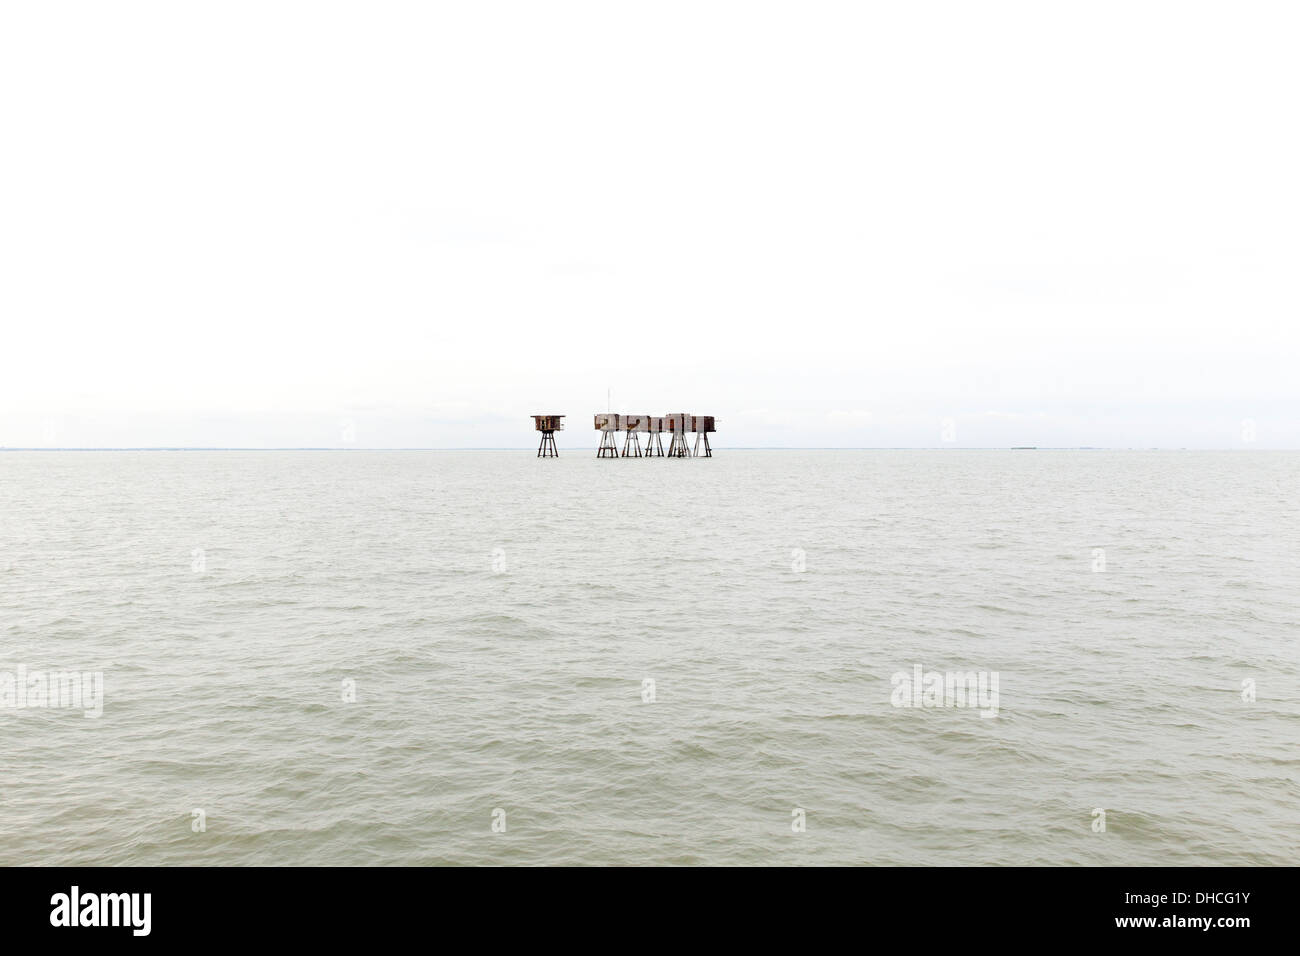 12/10/2013 Sea forts at Red Sands, Thames Estuary Maunsell Forts. River Thames, England, UK Stock Photo